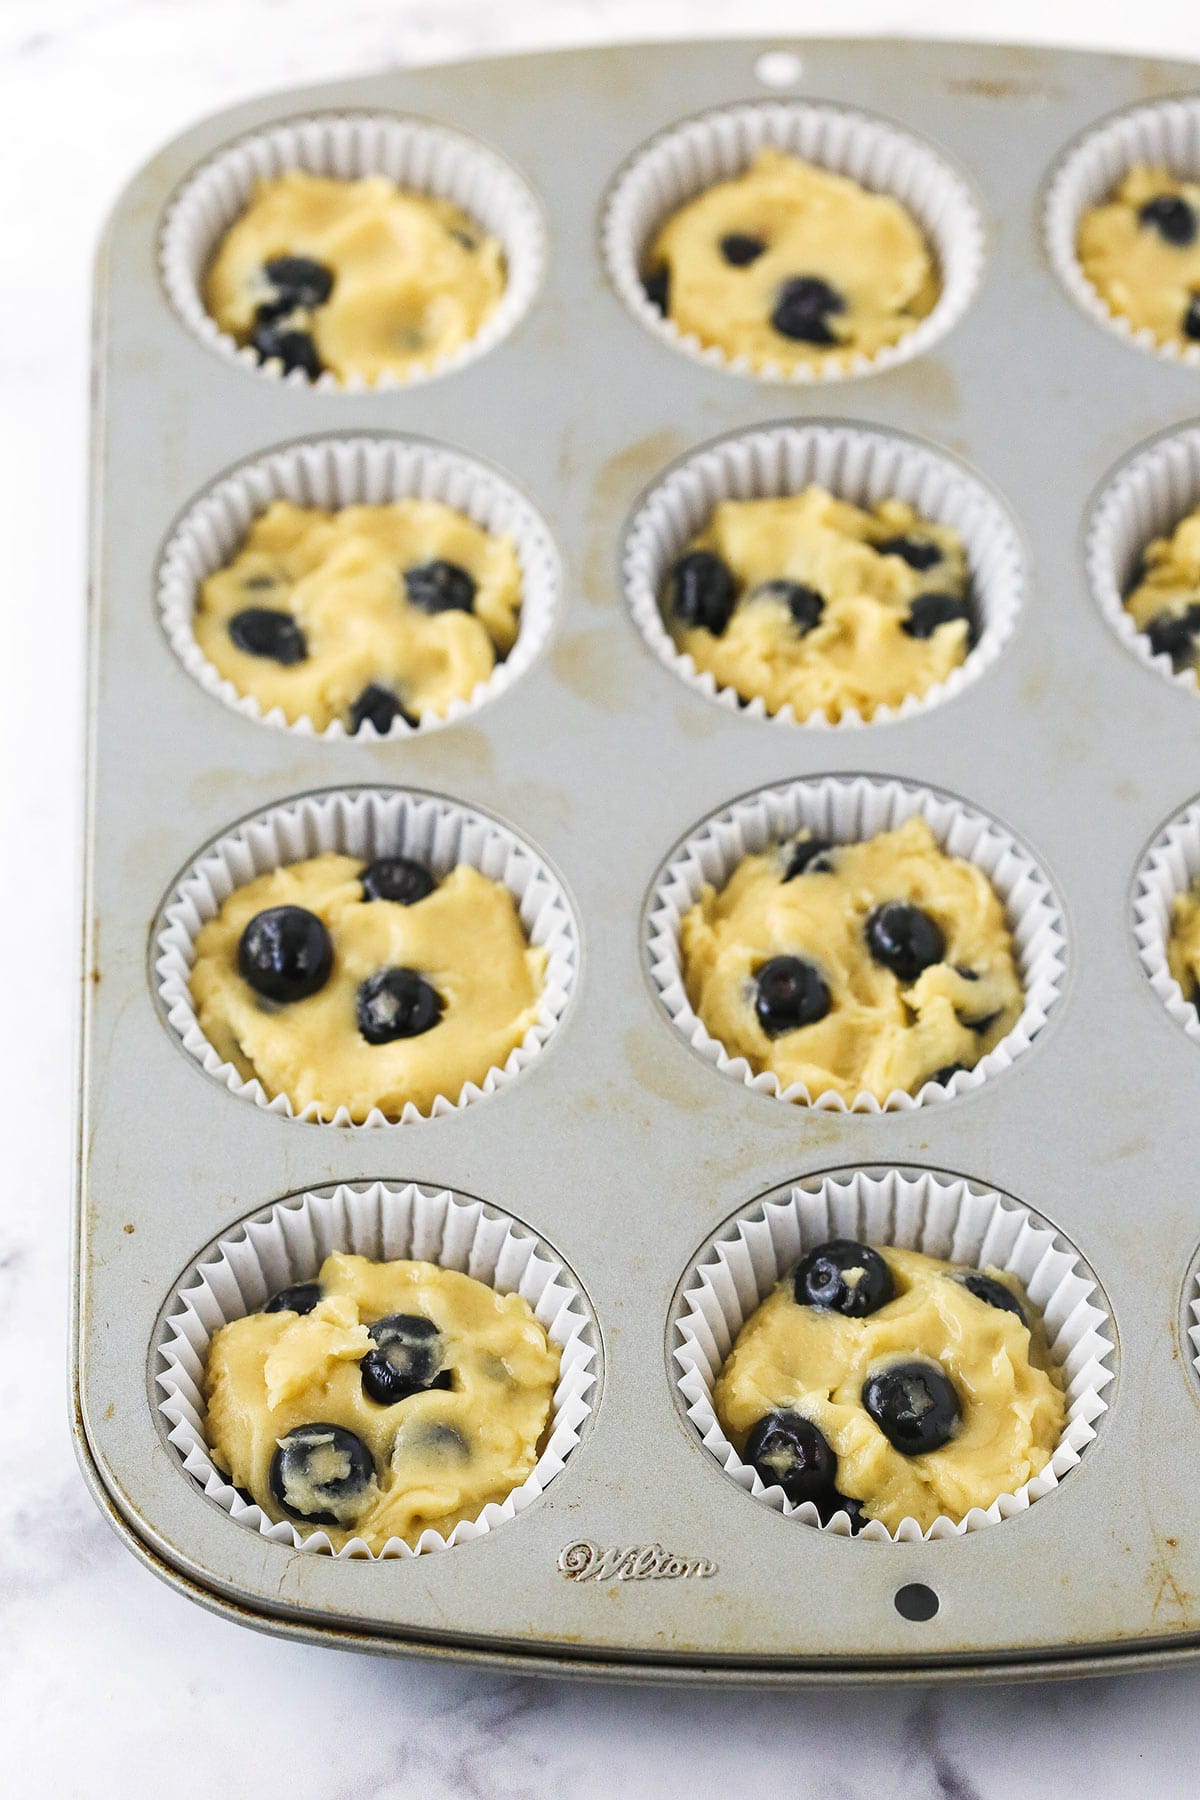 Blueberry muffin batter inside the cups of a large muffin tin